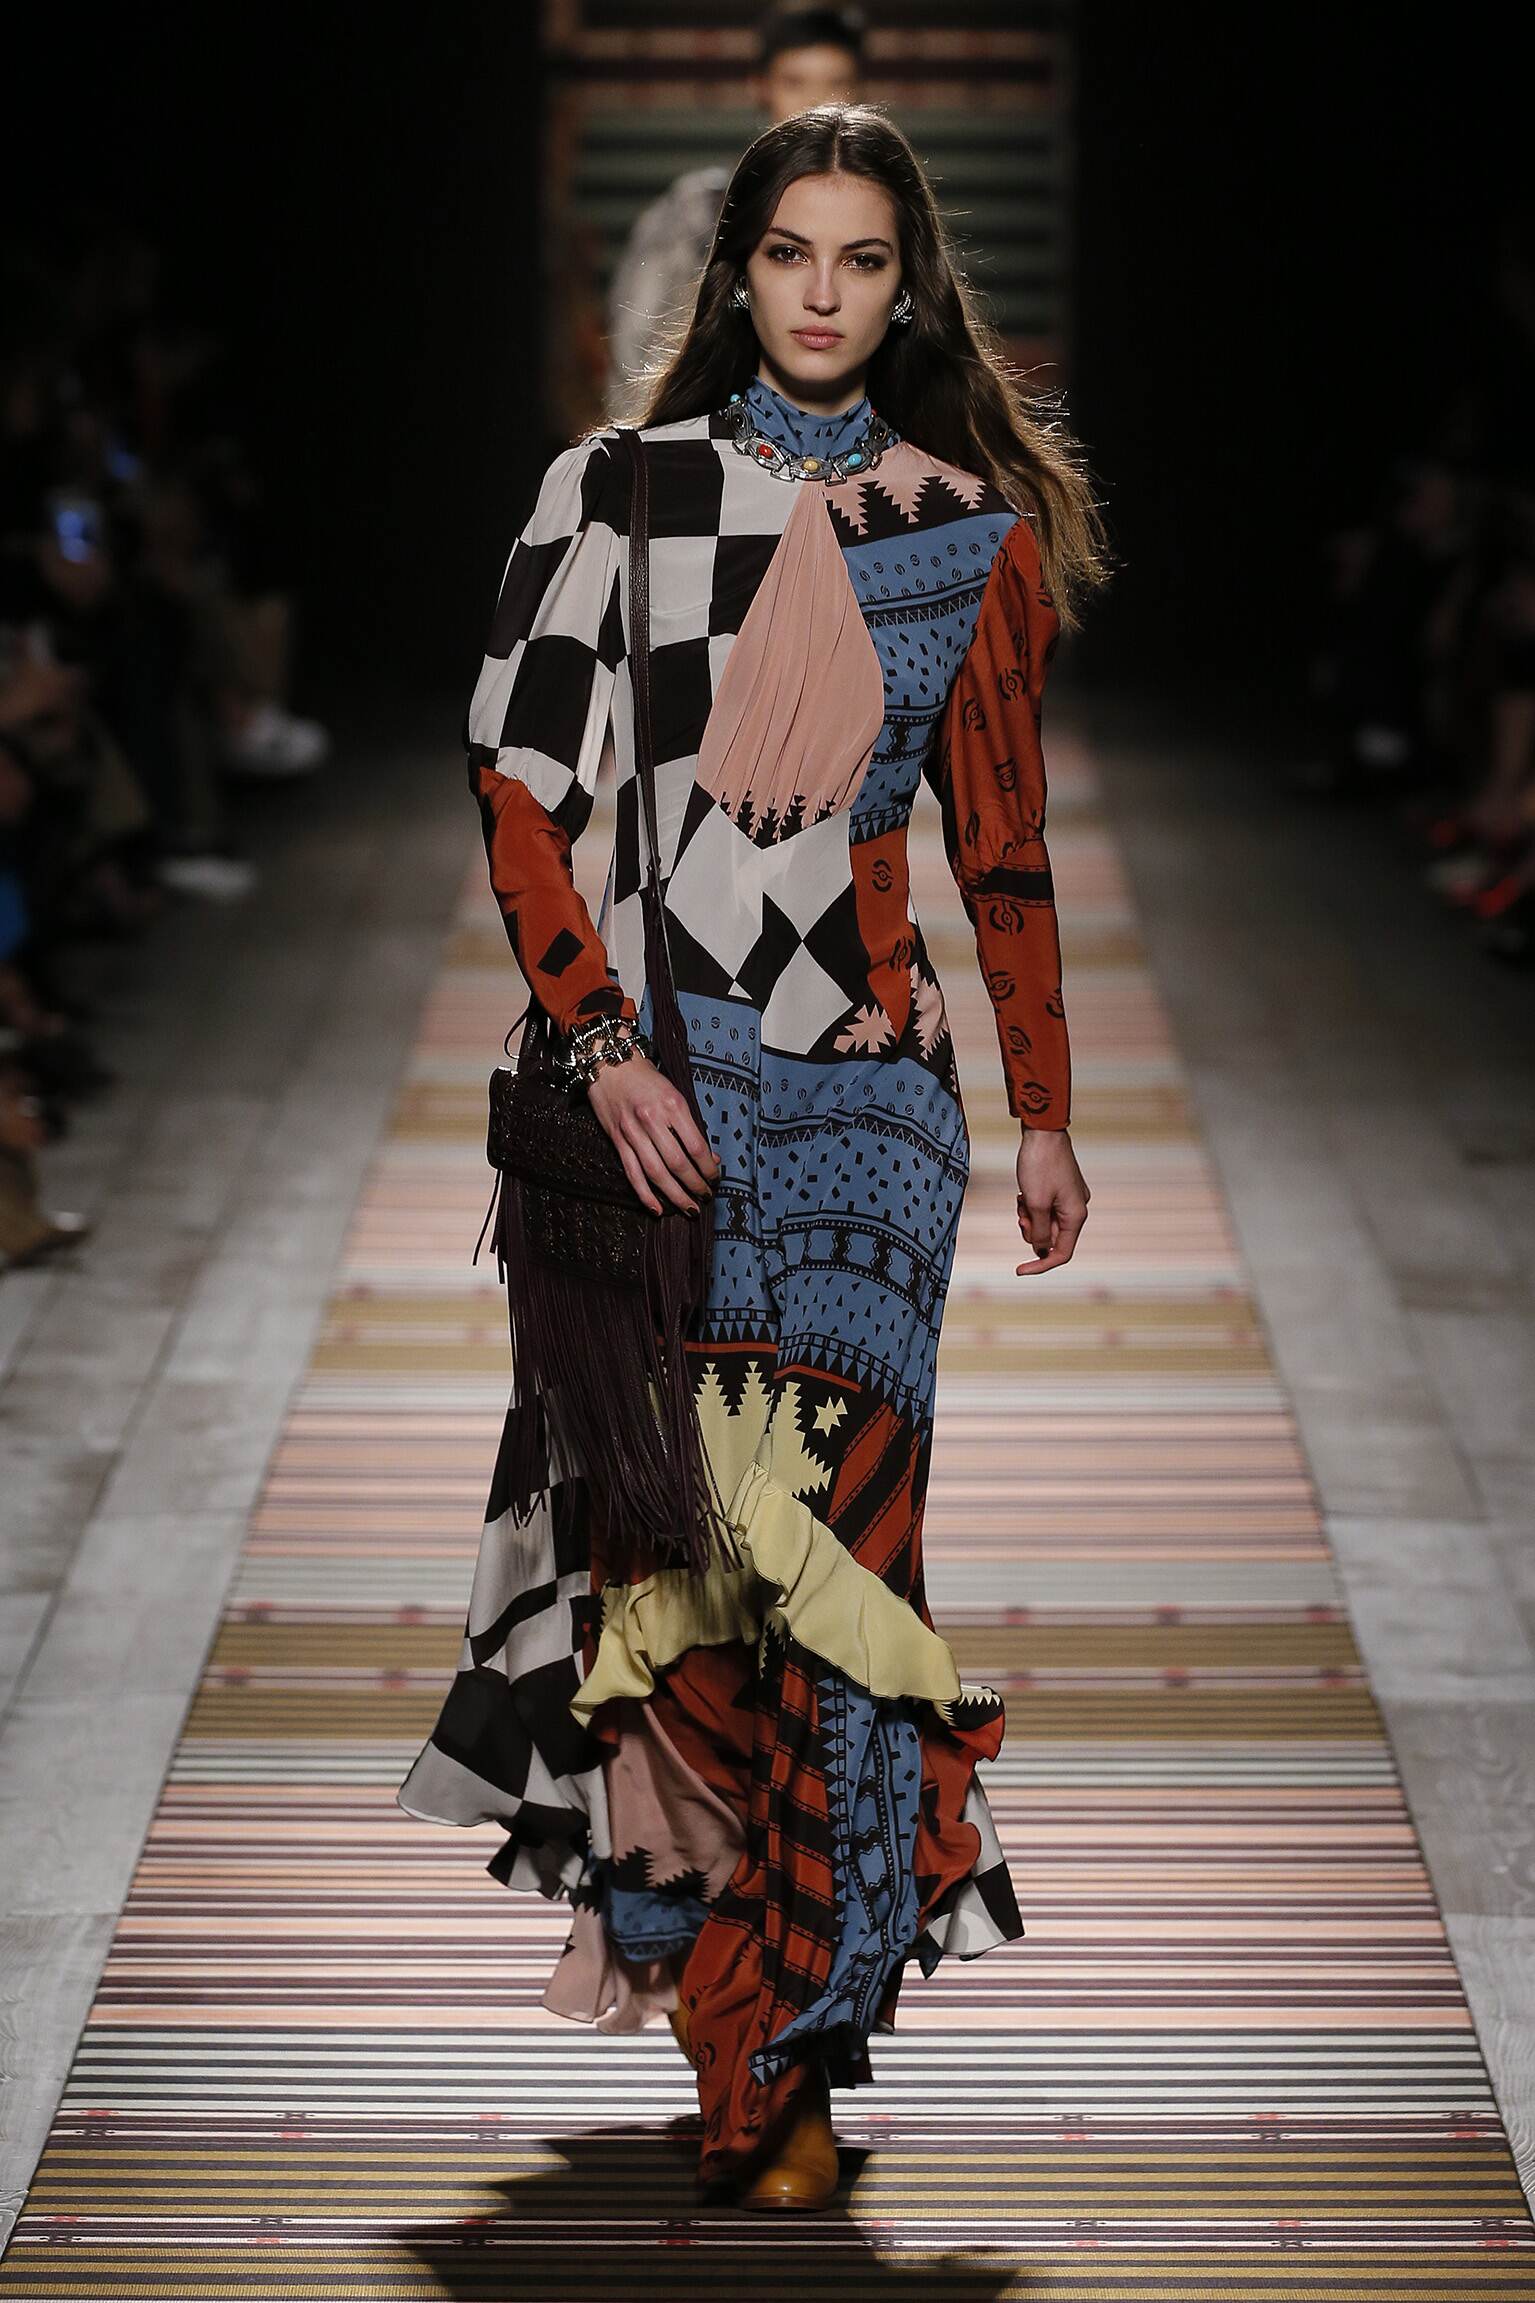 ETRO FALL WINTER 2018 WOMEN'S COLLECTION | The Skinny Beep